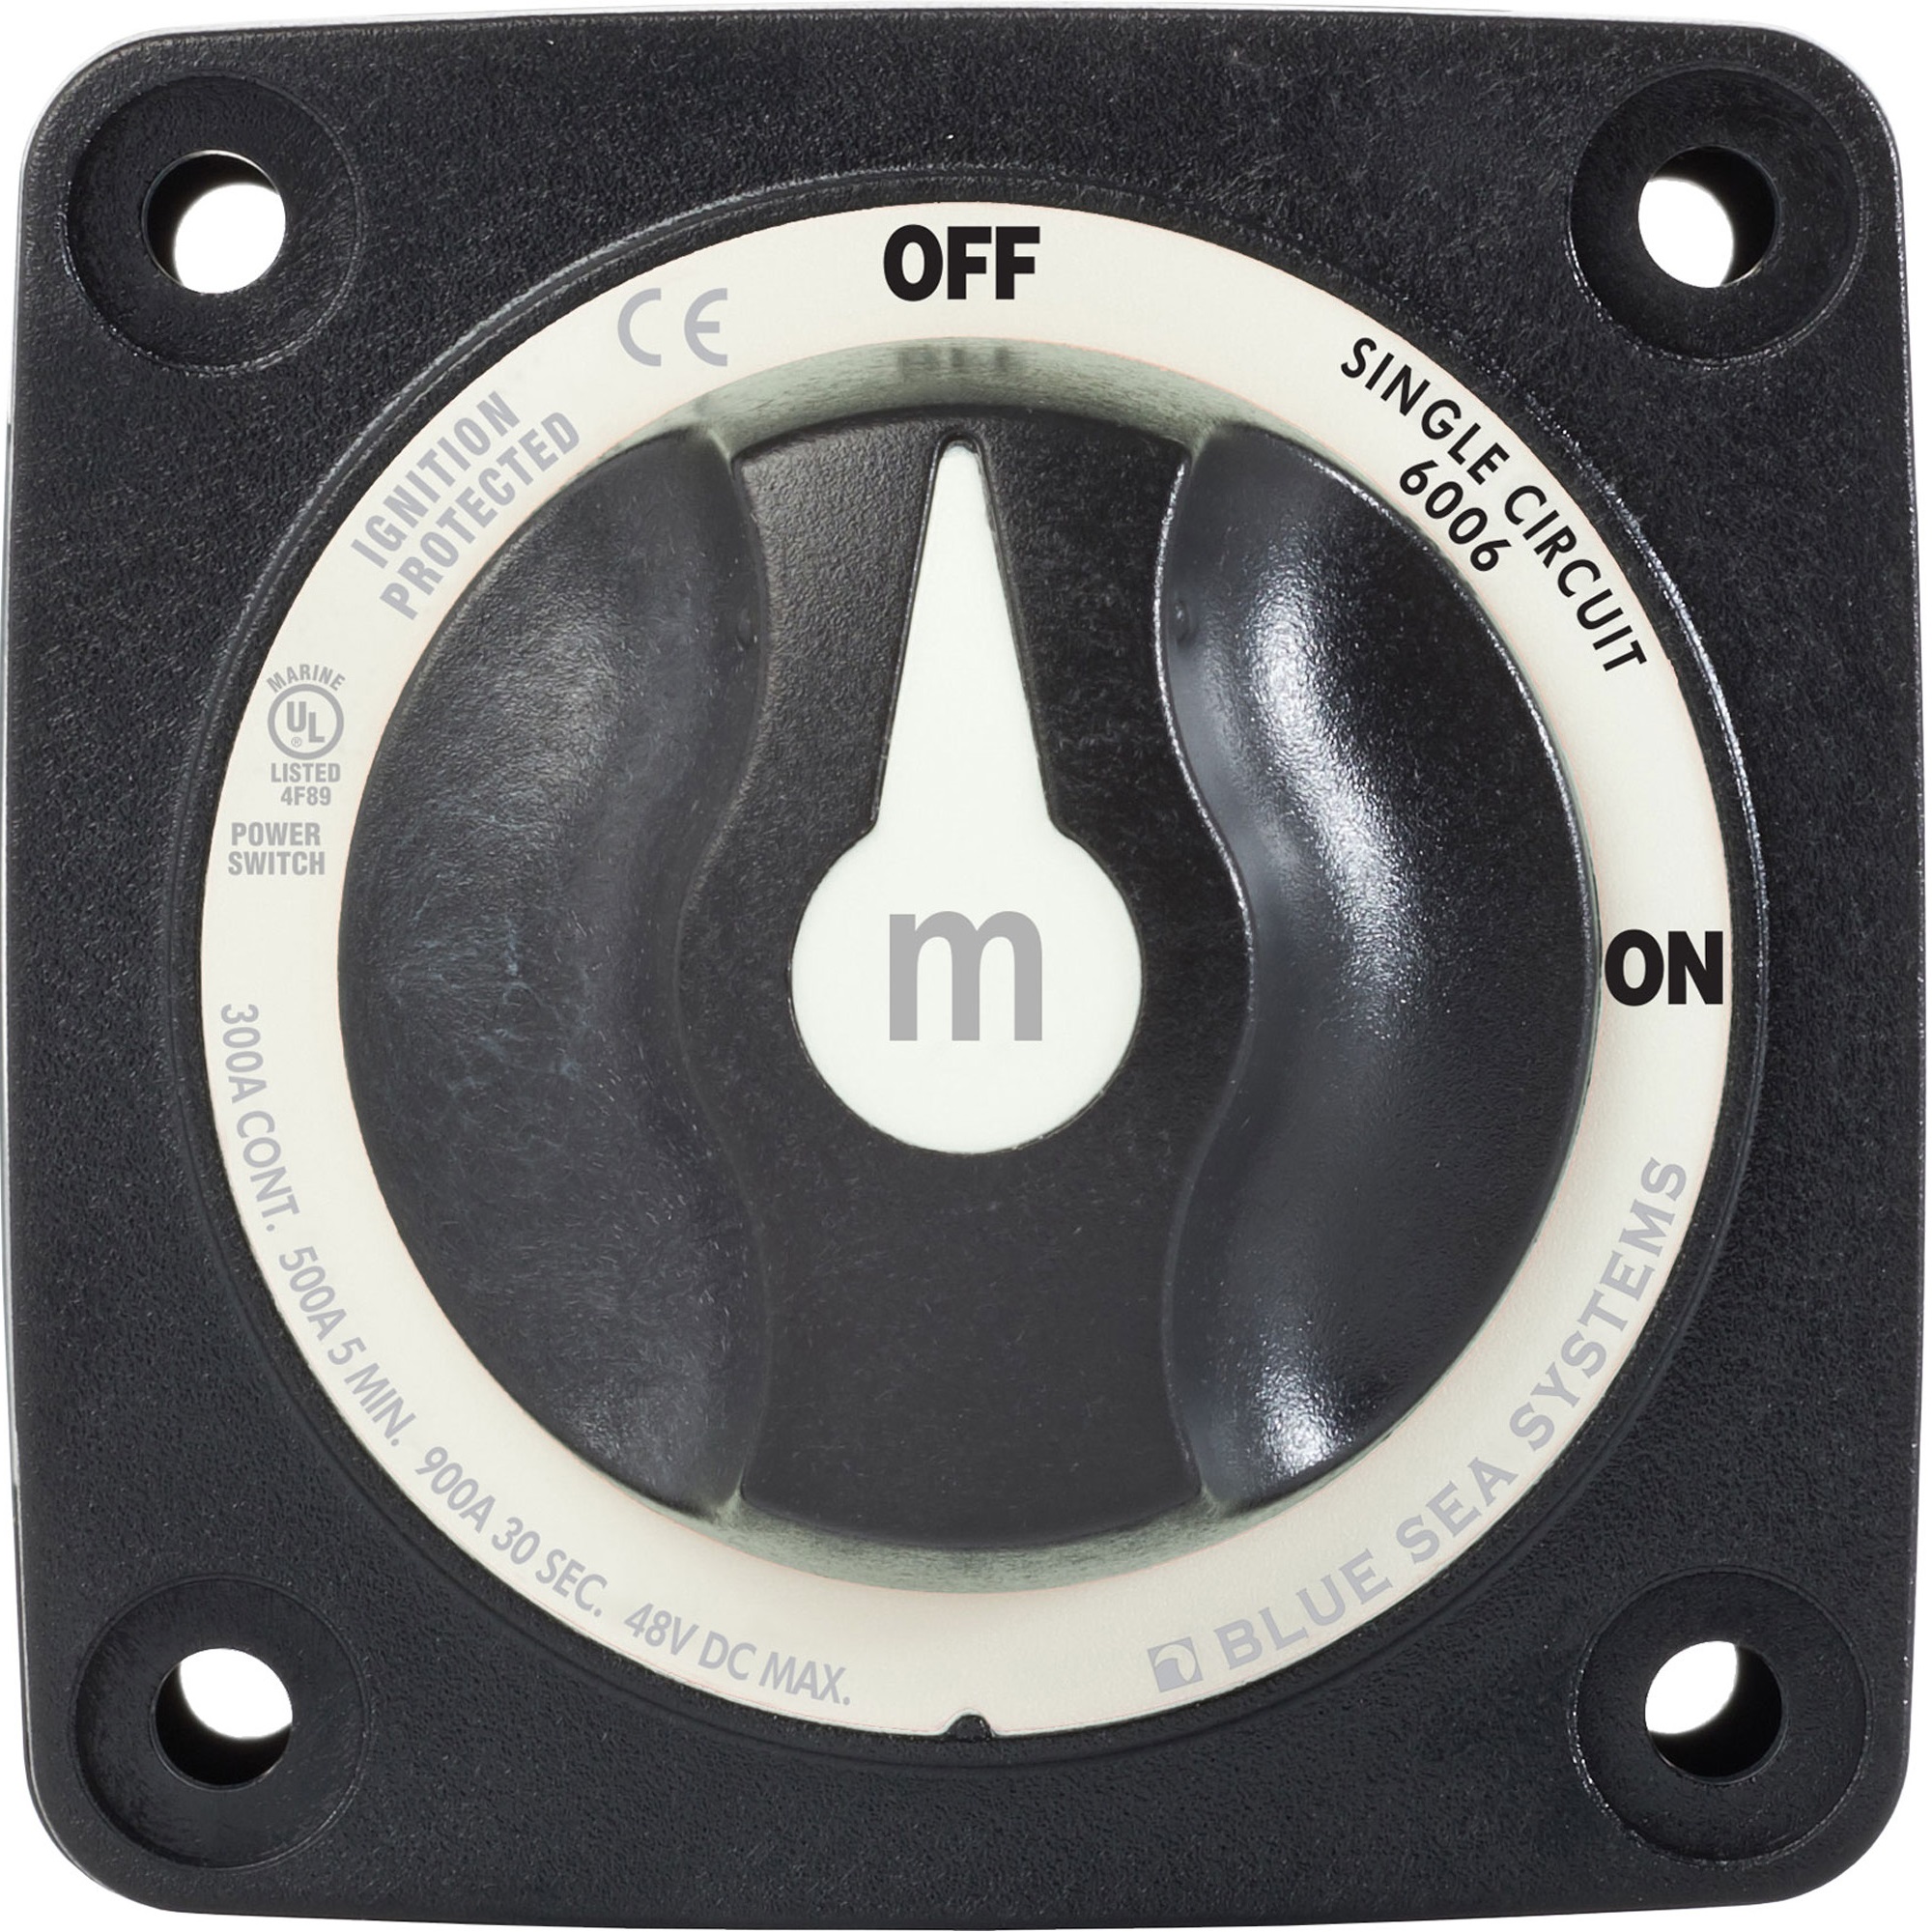 Blue Sea System 6" Black and White Blue Sea Systems 6006200 Battery Switch Mini On/Off